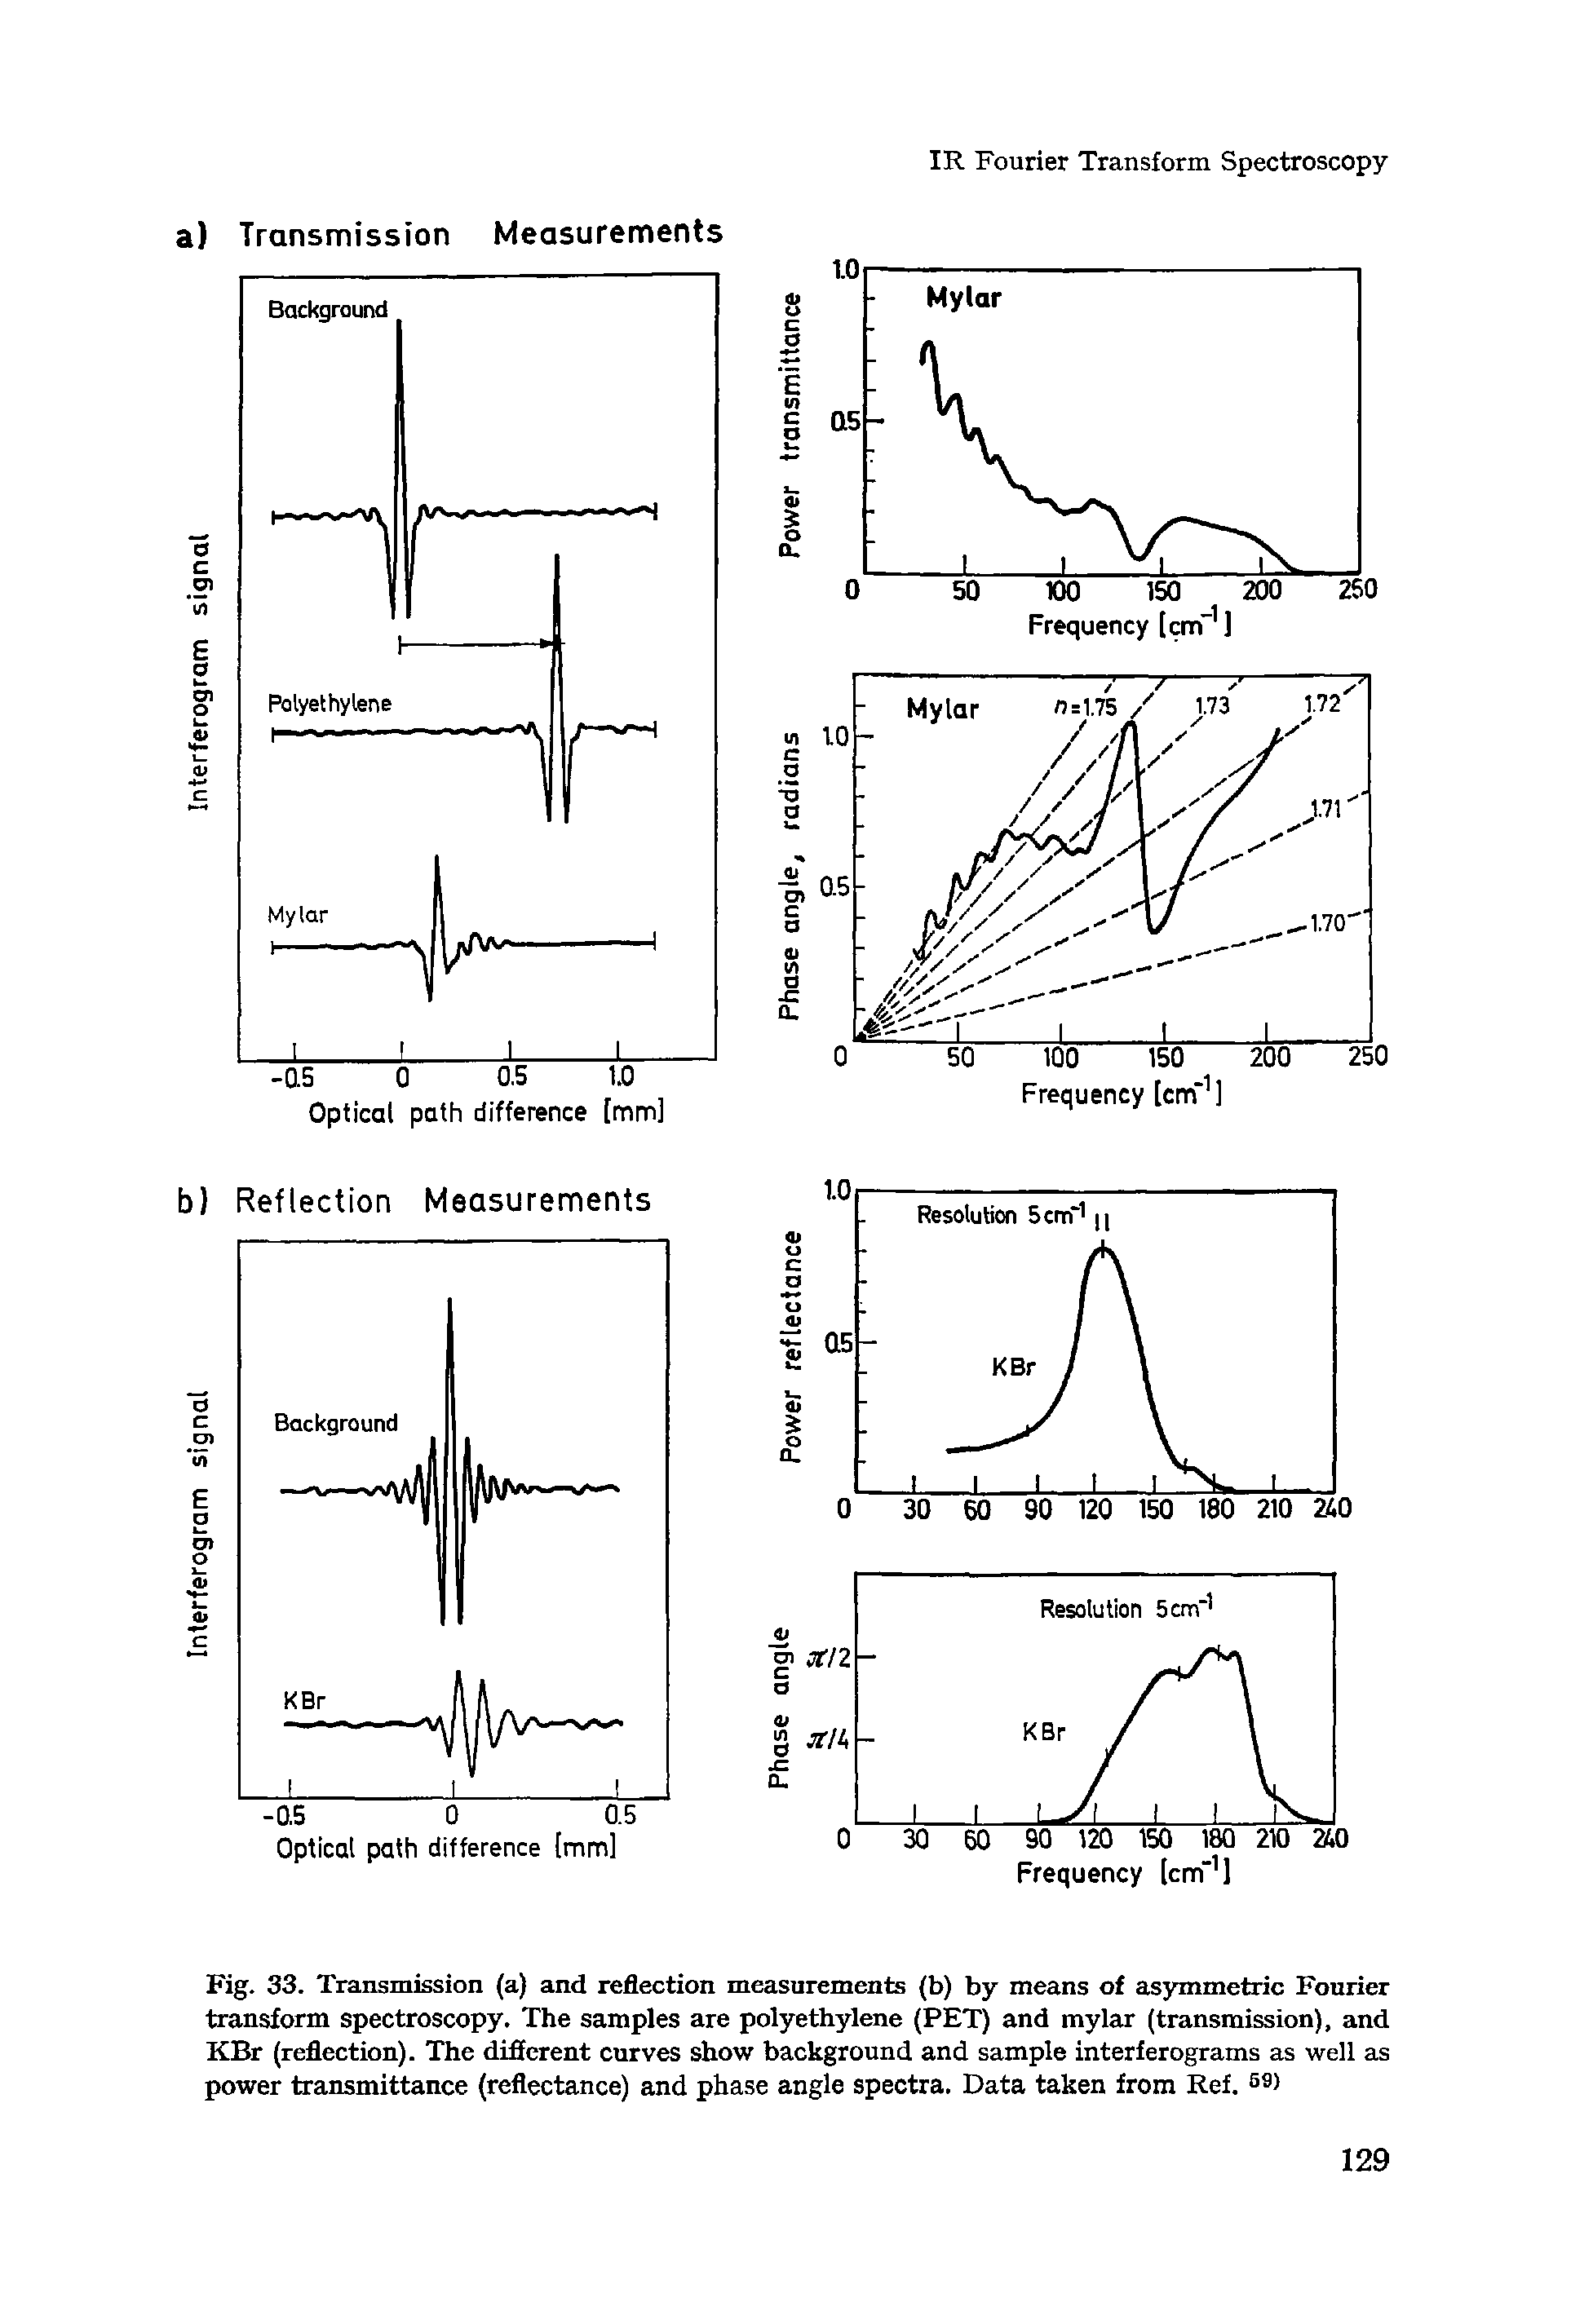 Fig. 33. Transmission (a) and reflection measurements (b) by means of asymmetric Fourier transform spectroscopy. The samples are polyethylene (PET) and mylar (transmission), and KBr (reflection). The difierent curves show background and sample interferograms as well as power transmittance (reflectance) and phase angle spectra. Data taken from Ref. 59)...